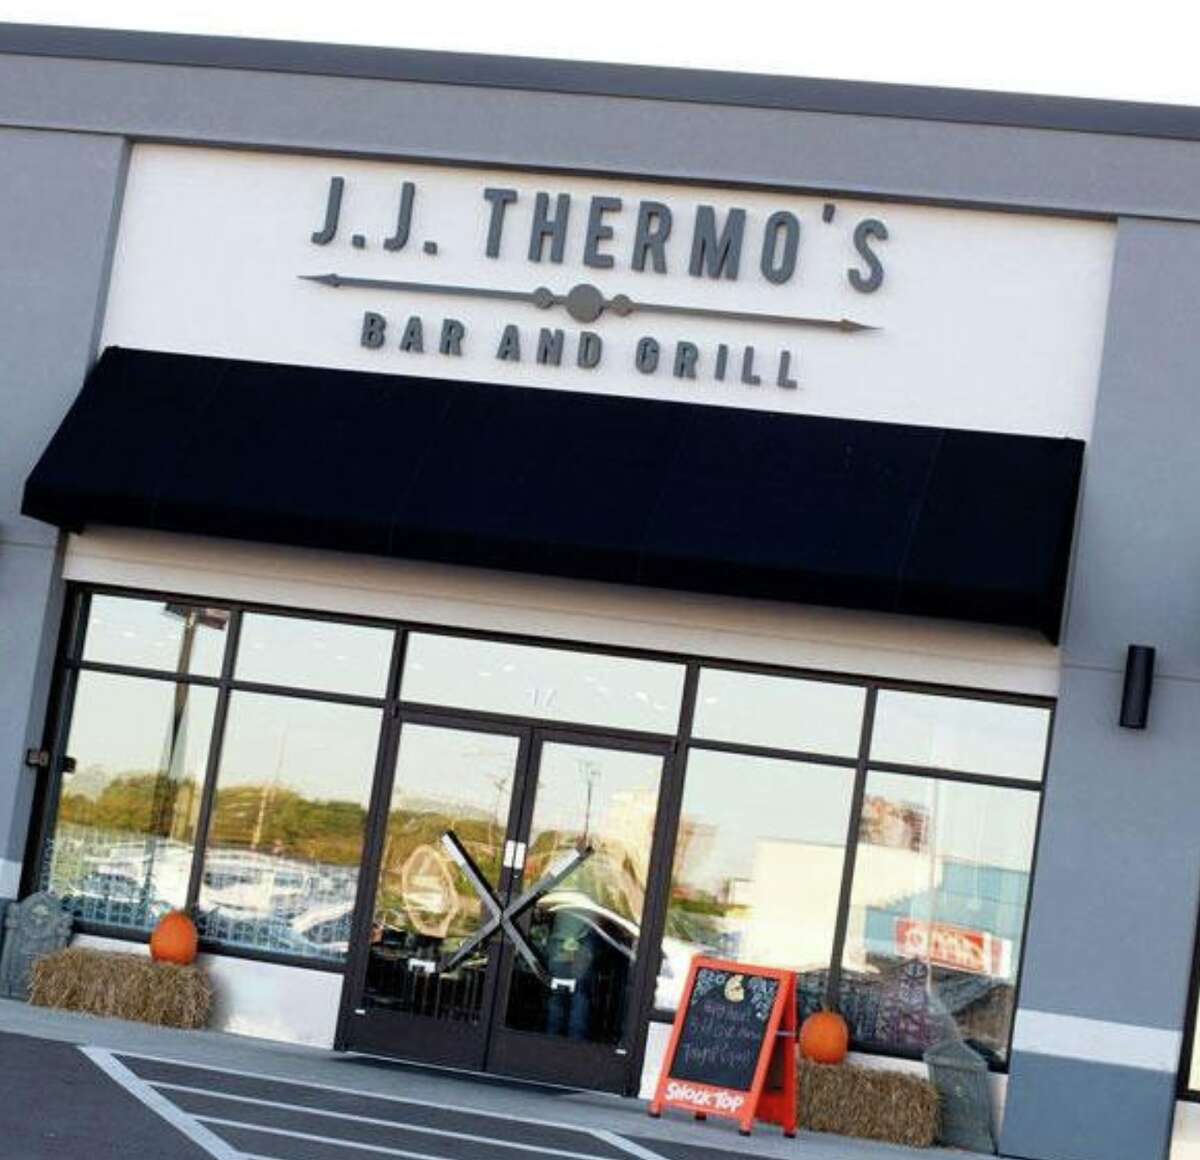 J. J. Thermo's is located at 17 Eastgate Plaza in East Alton.